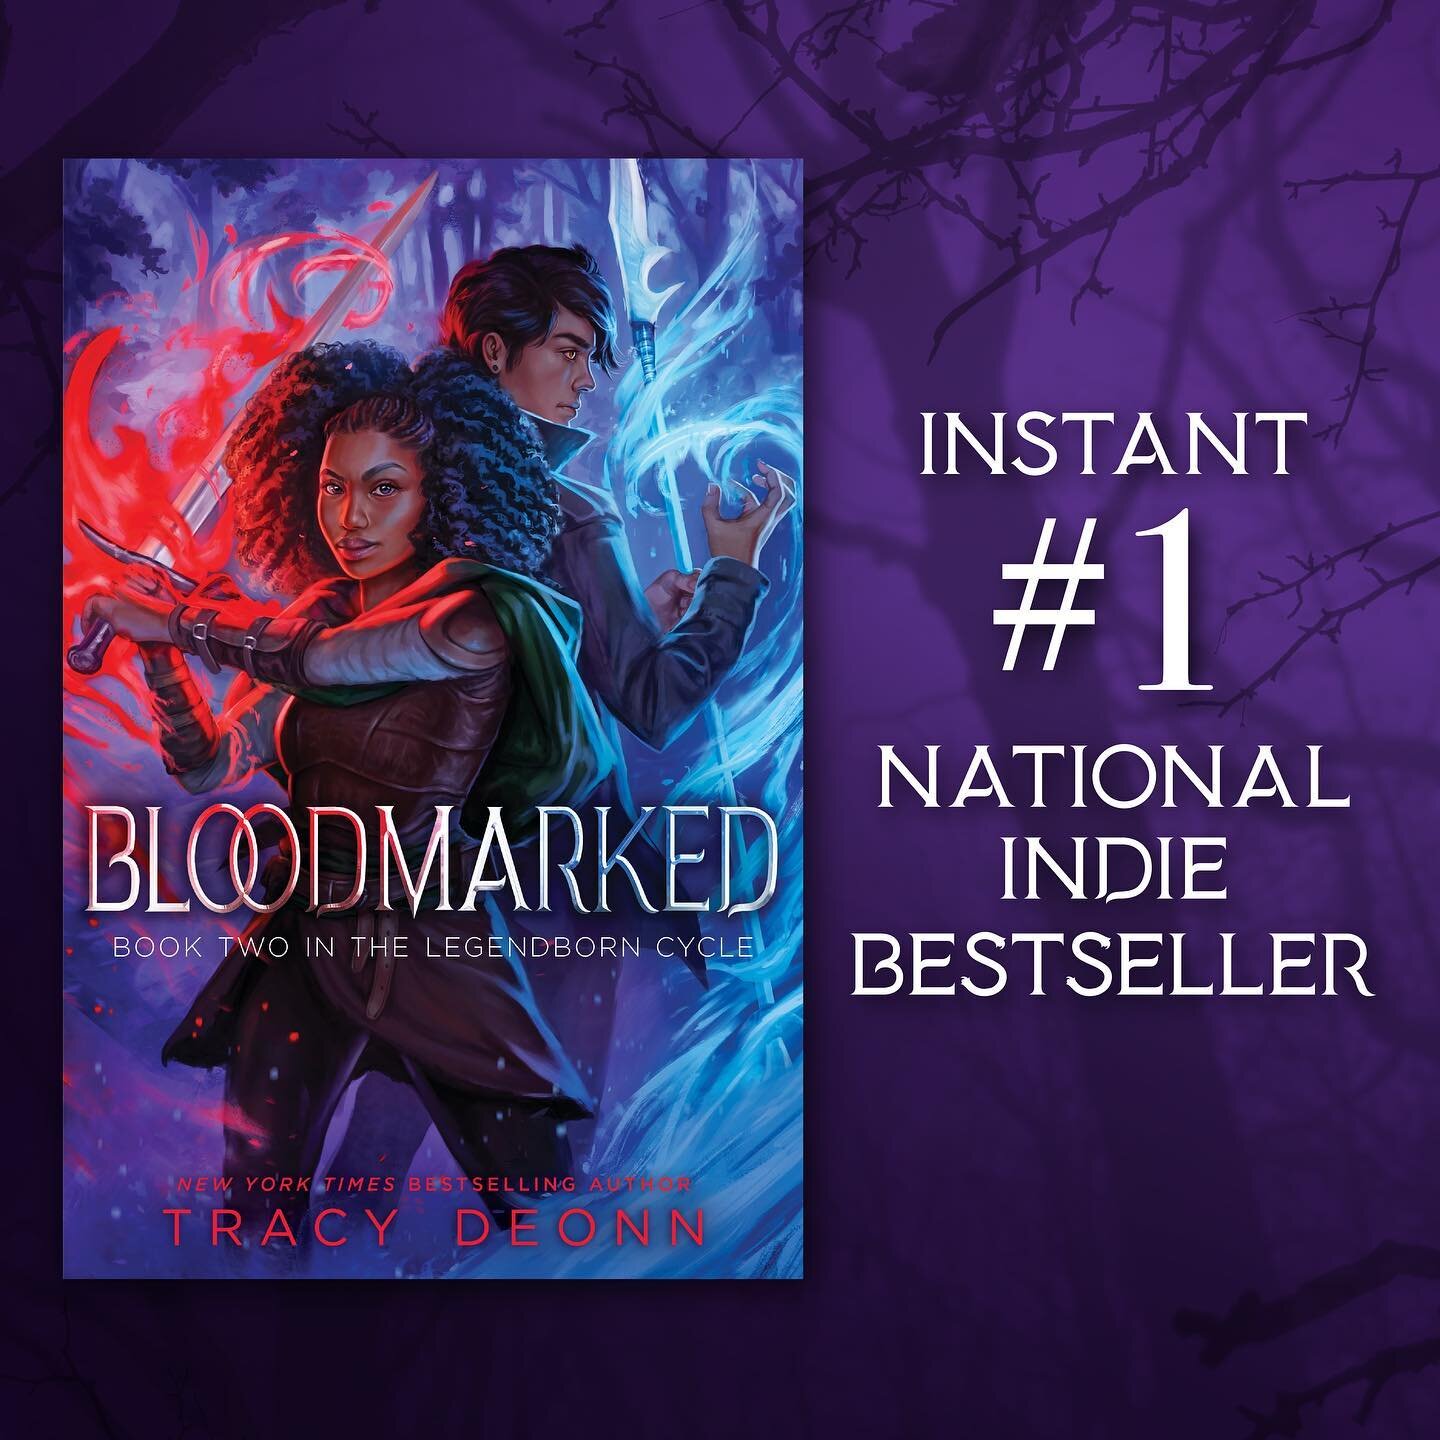 Some more good news to share! BLOODMARKED is an instant #1 National Indie Bestseller! 💜 Thank you to all the Indie bookstores who have shown so much love to Bree since 2020. What a way to celebrate NovemBree! 🎉